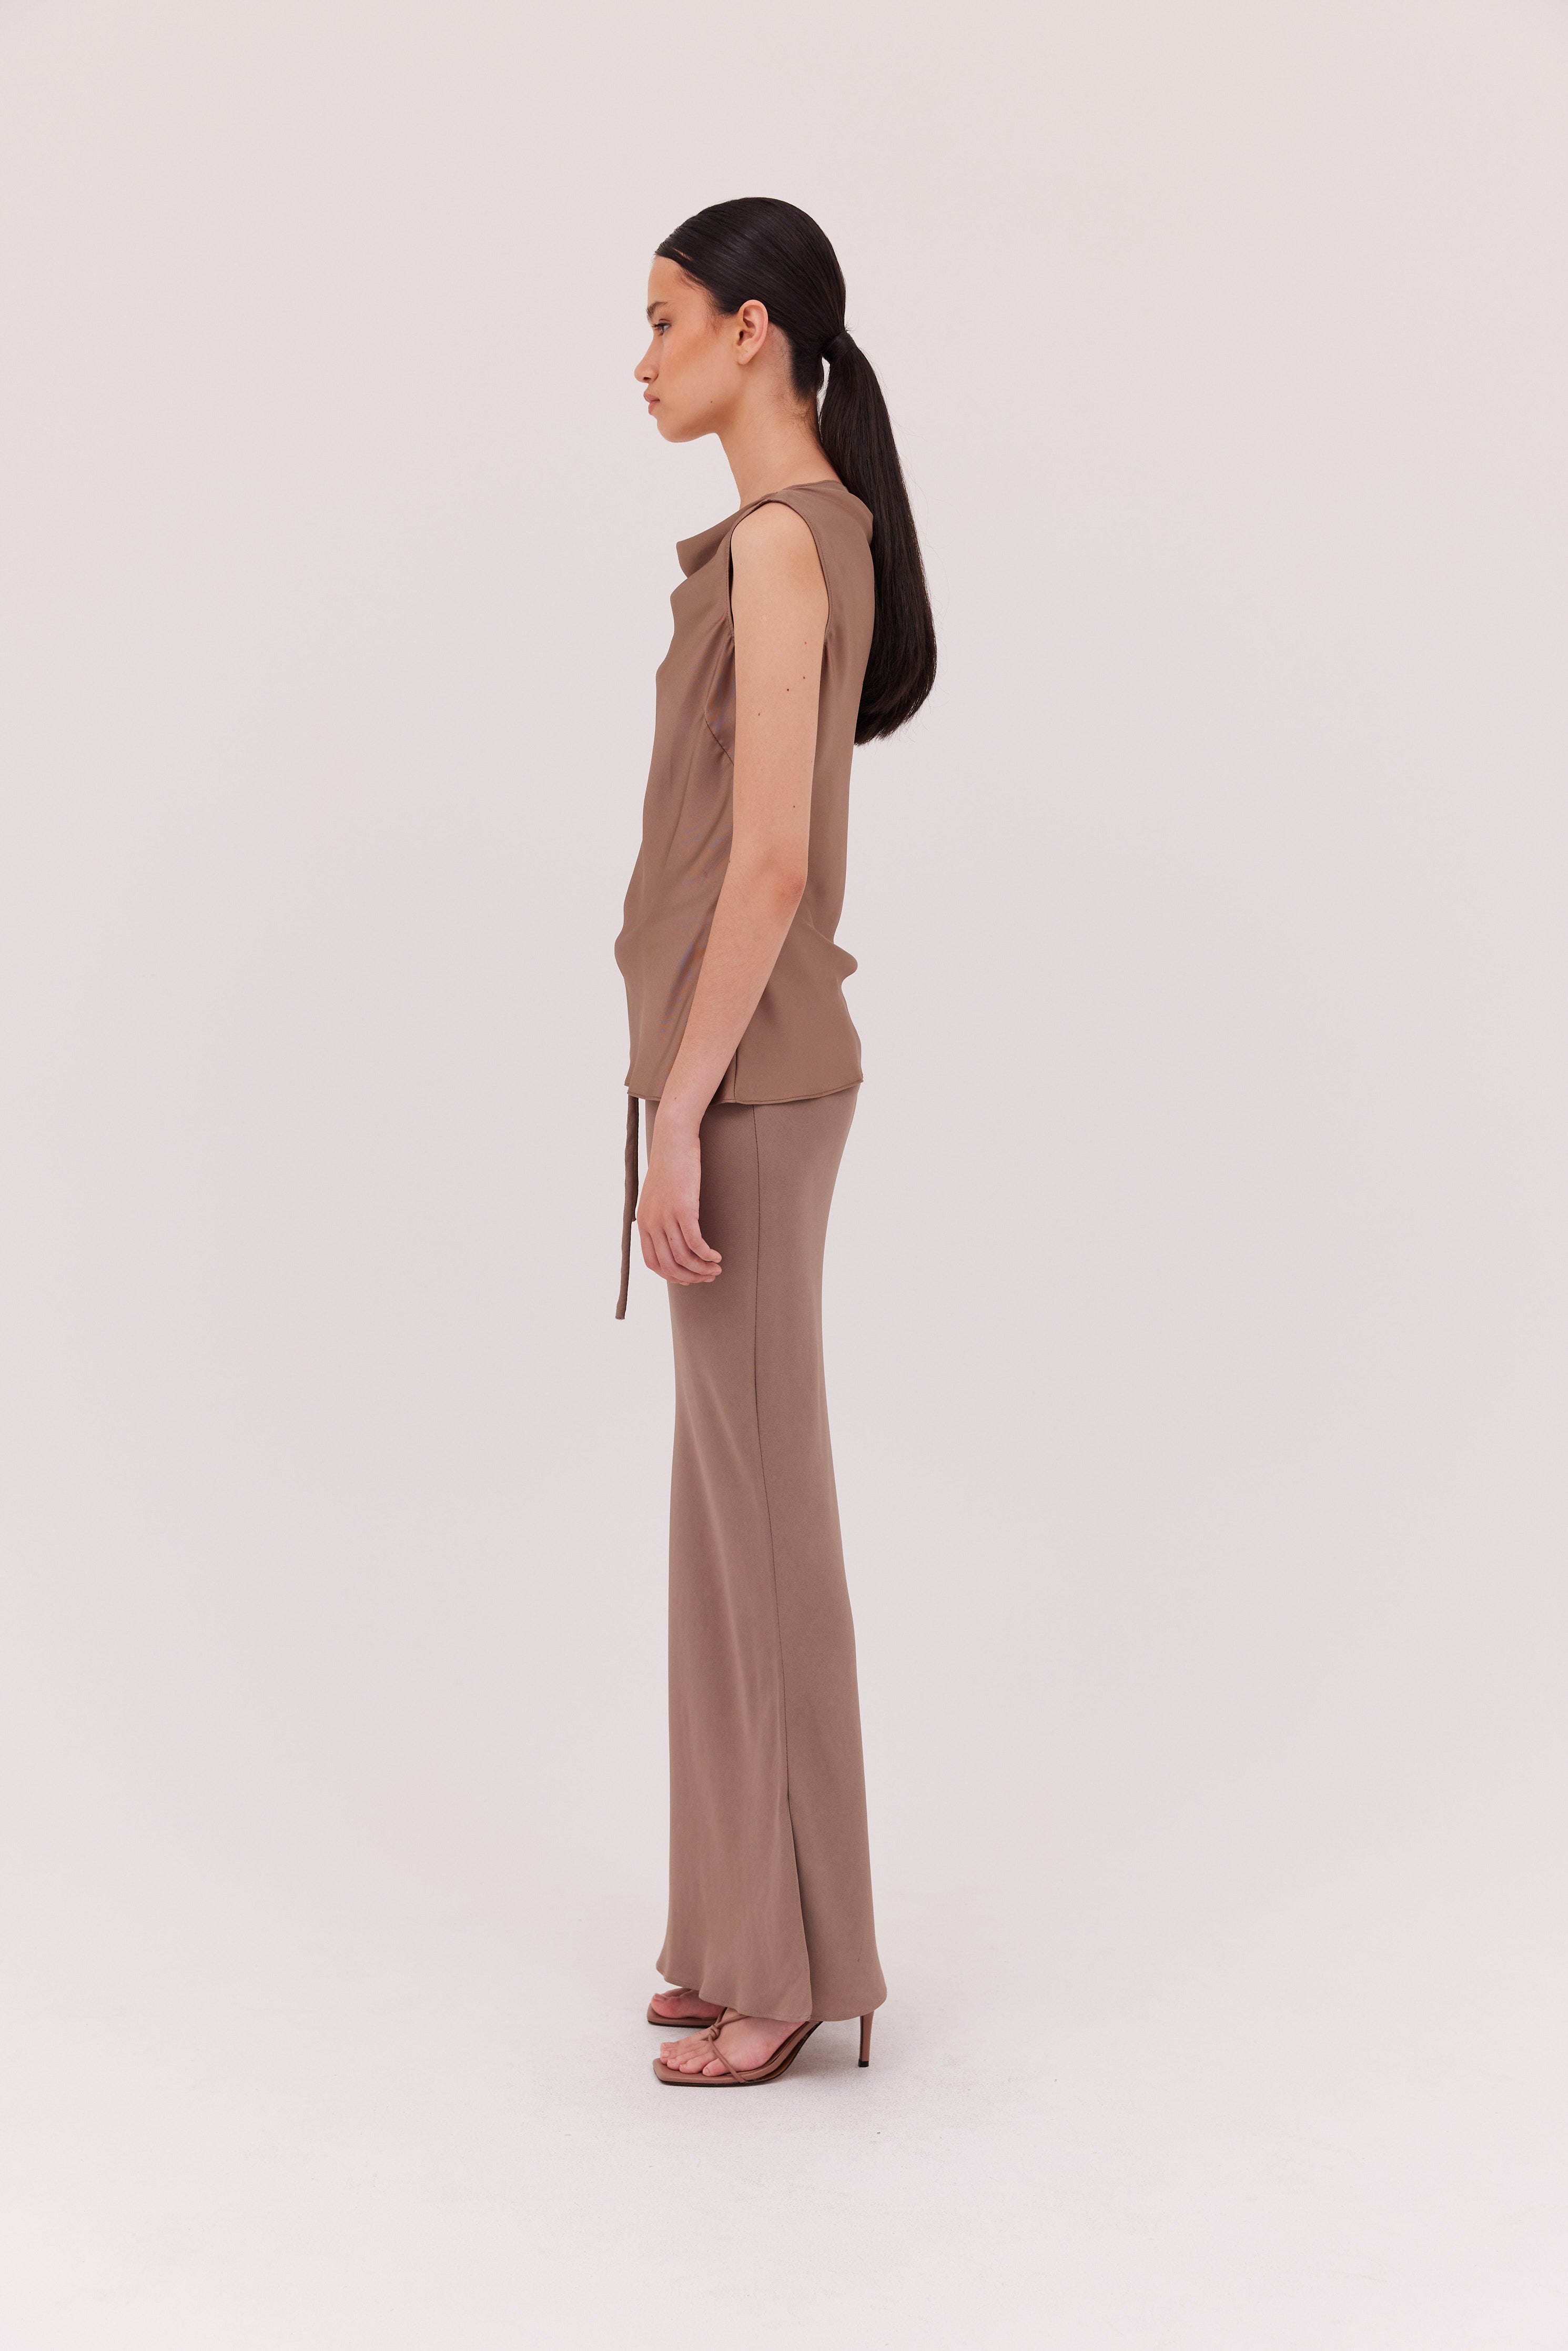 TAUPE SILK LINEAR TOP